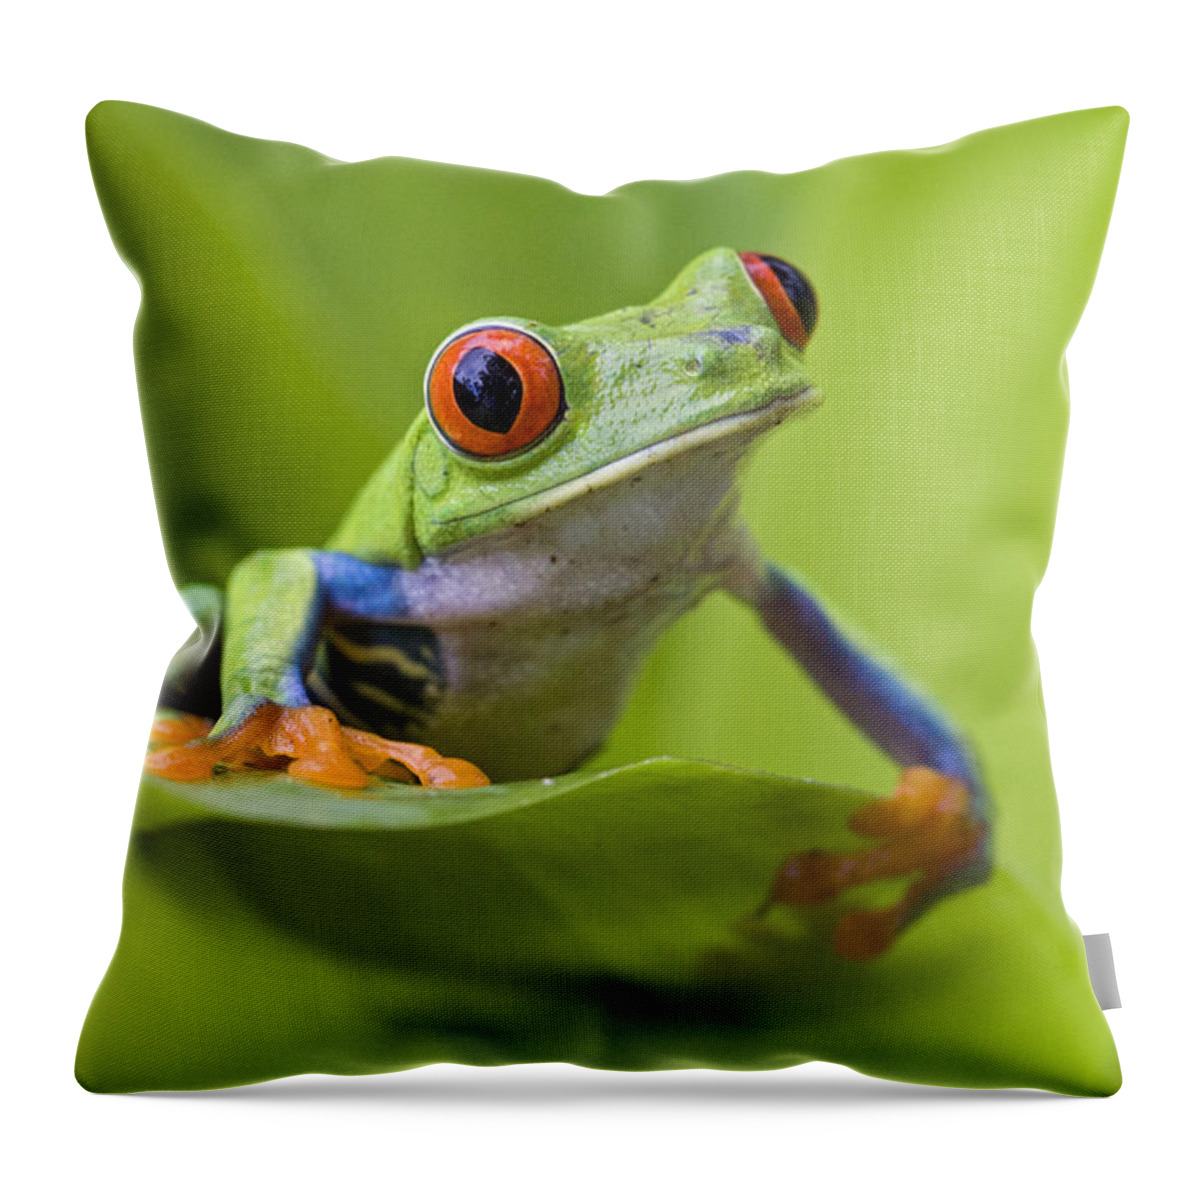 Feb0514 Throw Pillow featuring the photograph Red-eyed Tree Frog Costa Rica #4 by Suzi Eszterhas